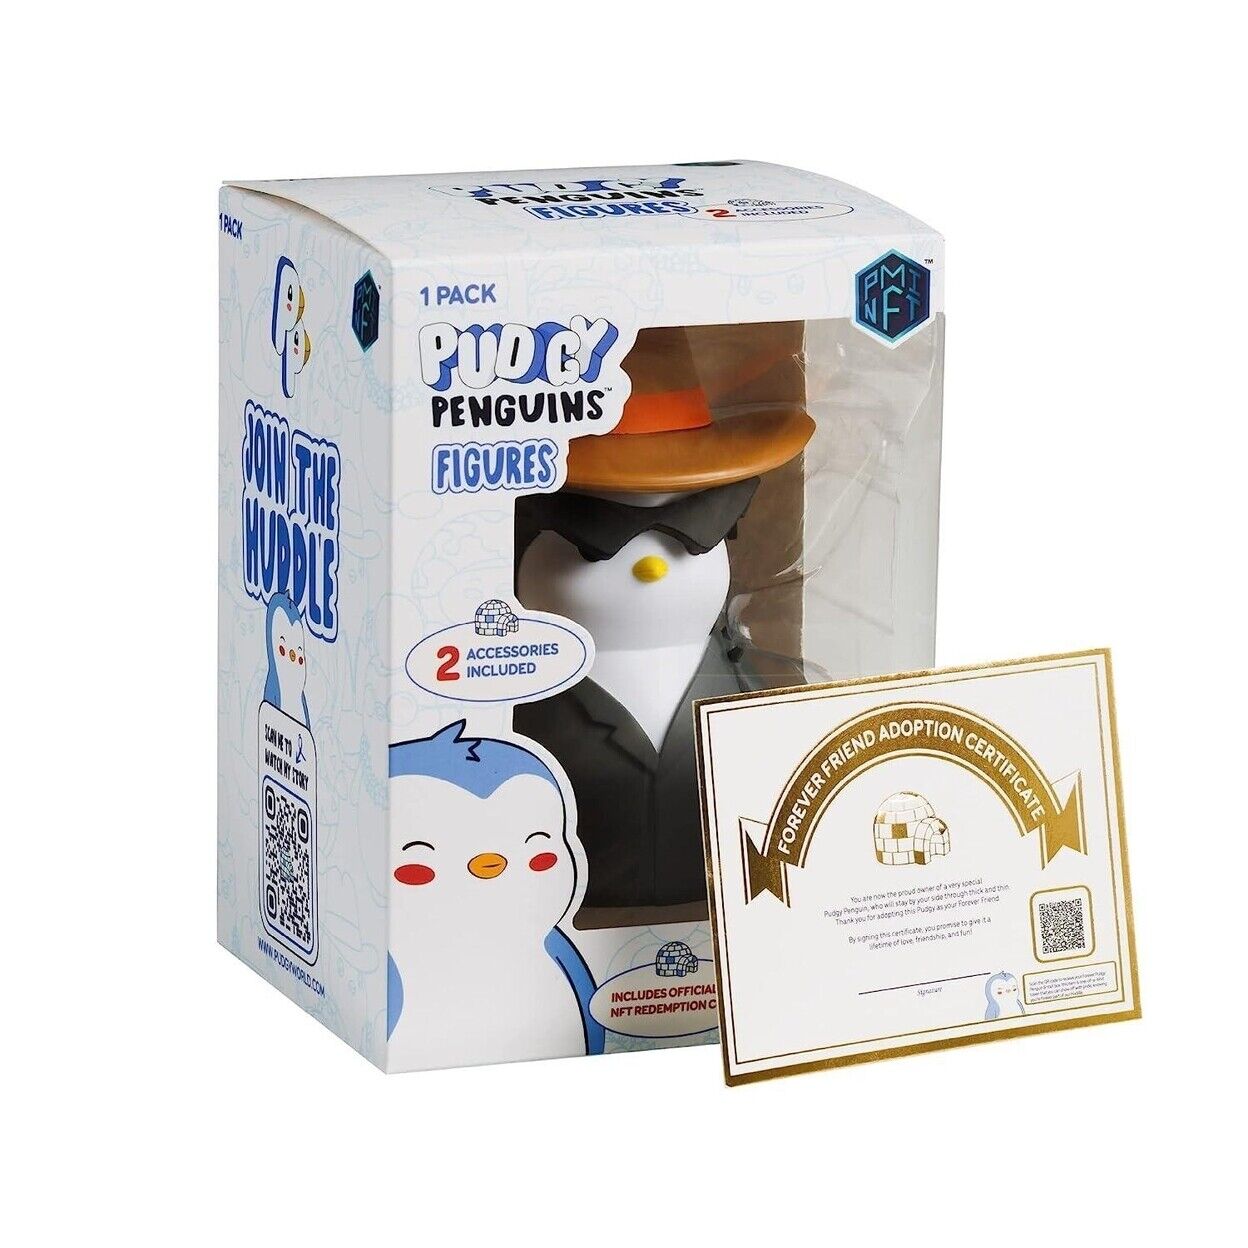 Pudgy Penguins Cowboy Adopt Forever Friend with Outfits Figure New with Box